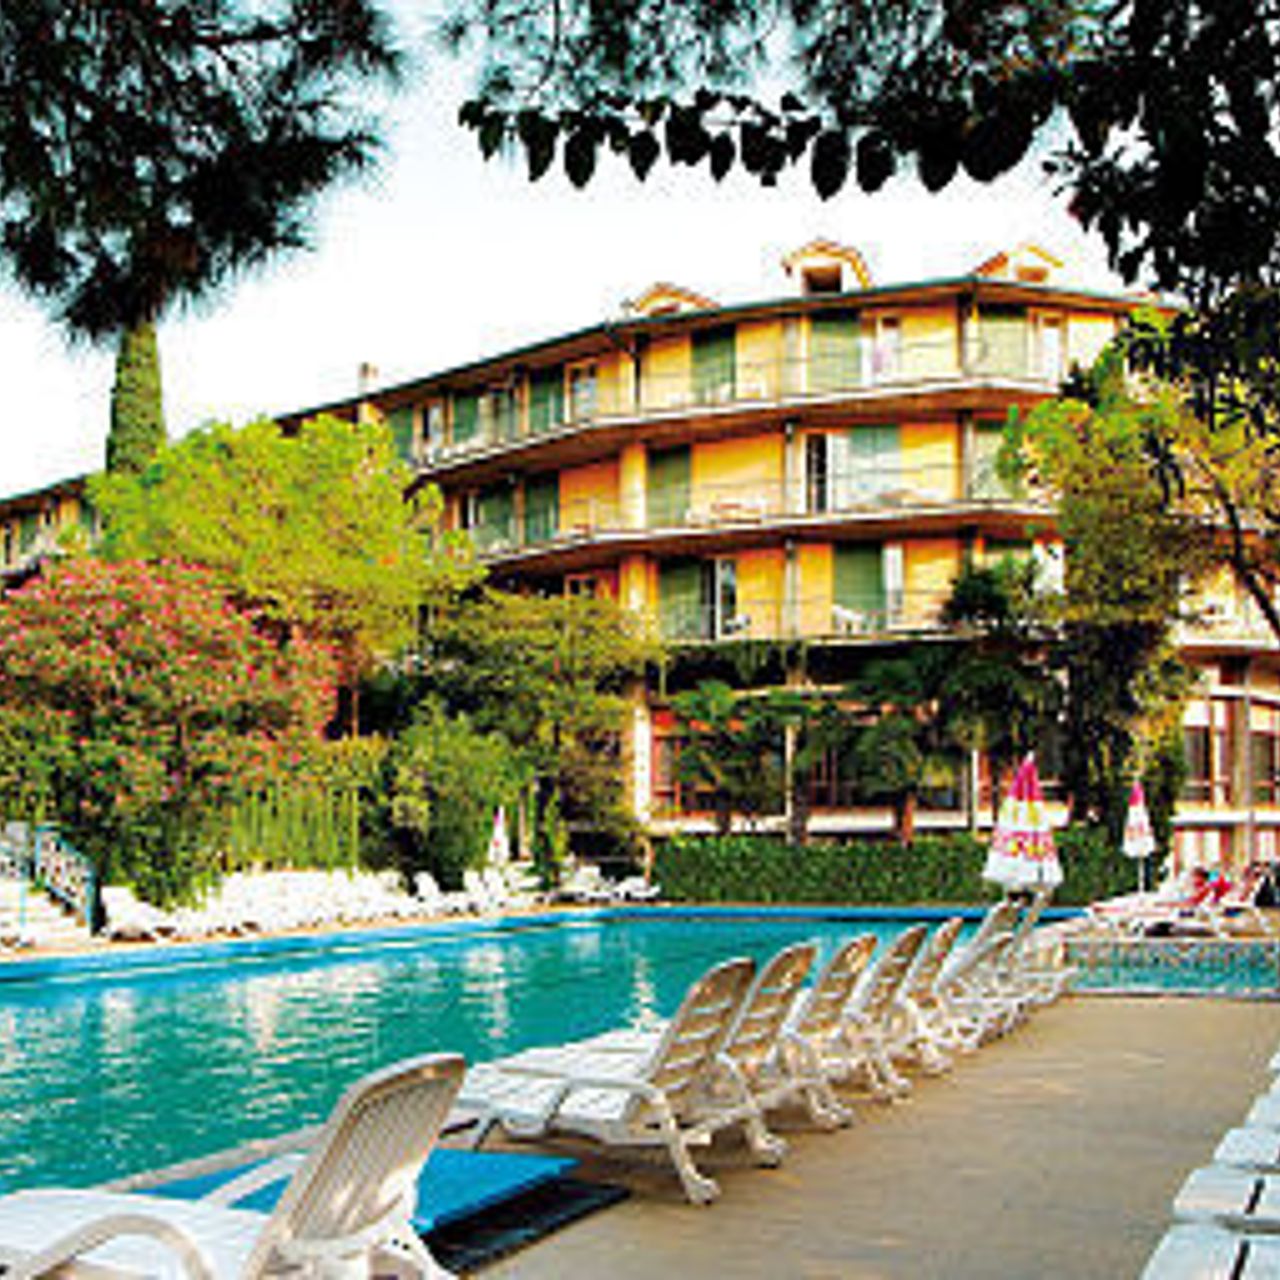 Hotel Le Palme - Garda - Great prices at HOTEL INFO